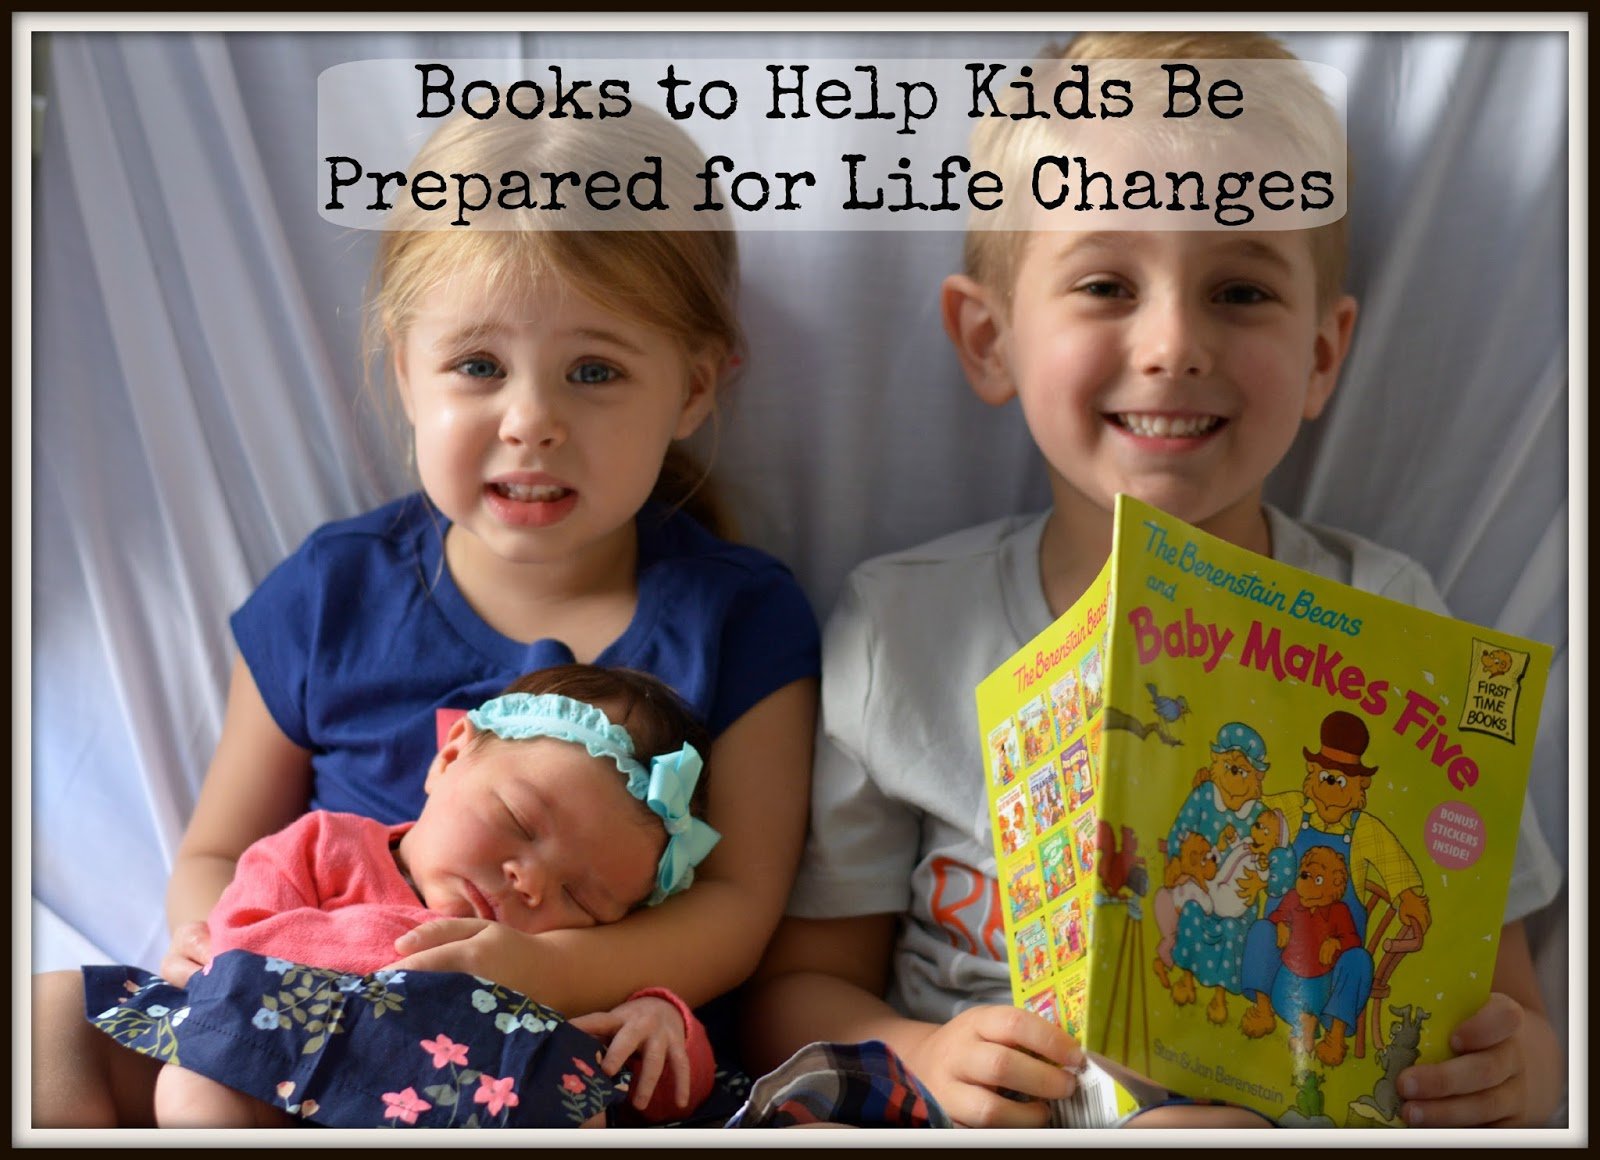 Books to Help Prepare Kids for Life Changes